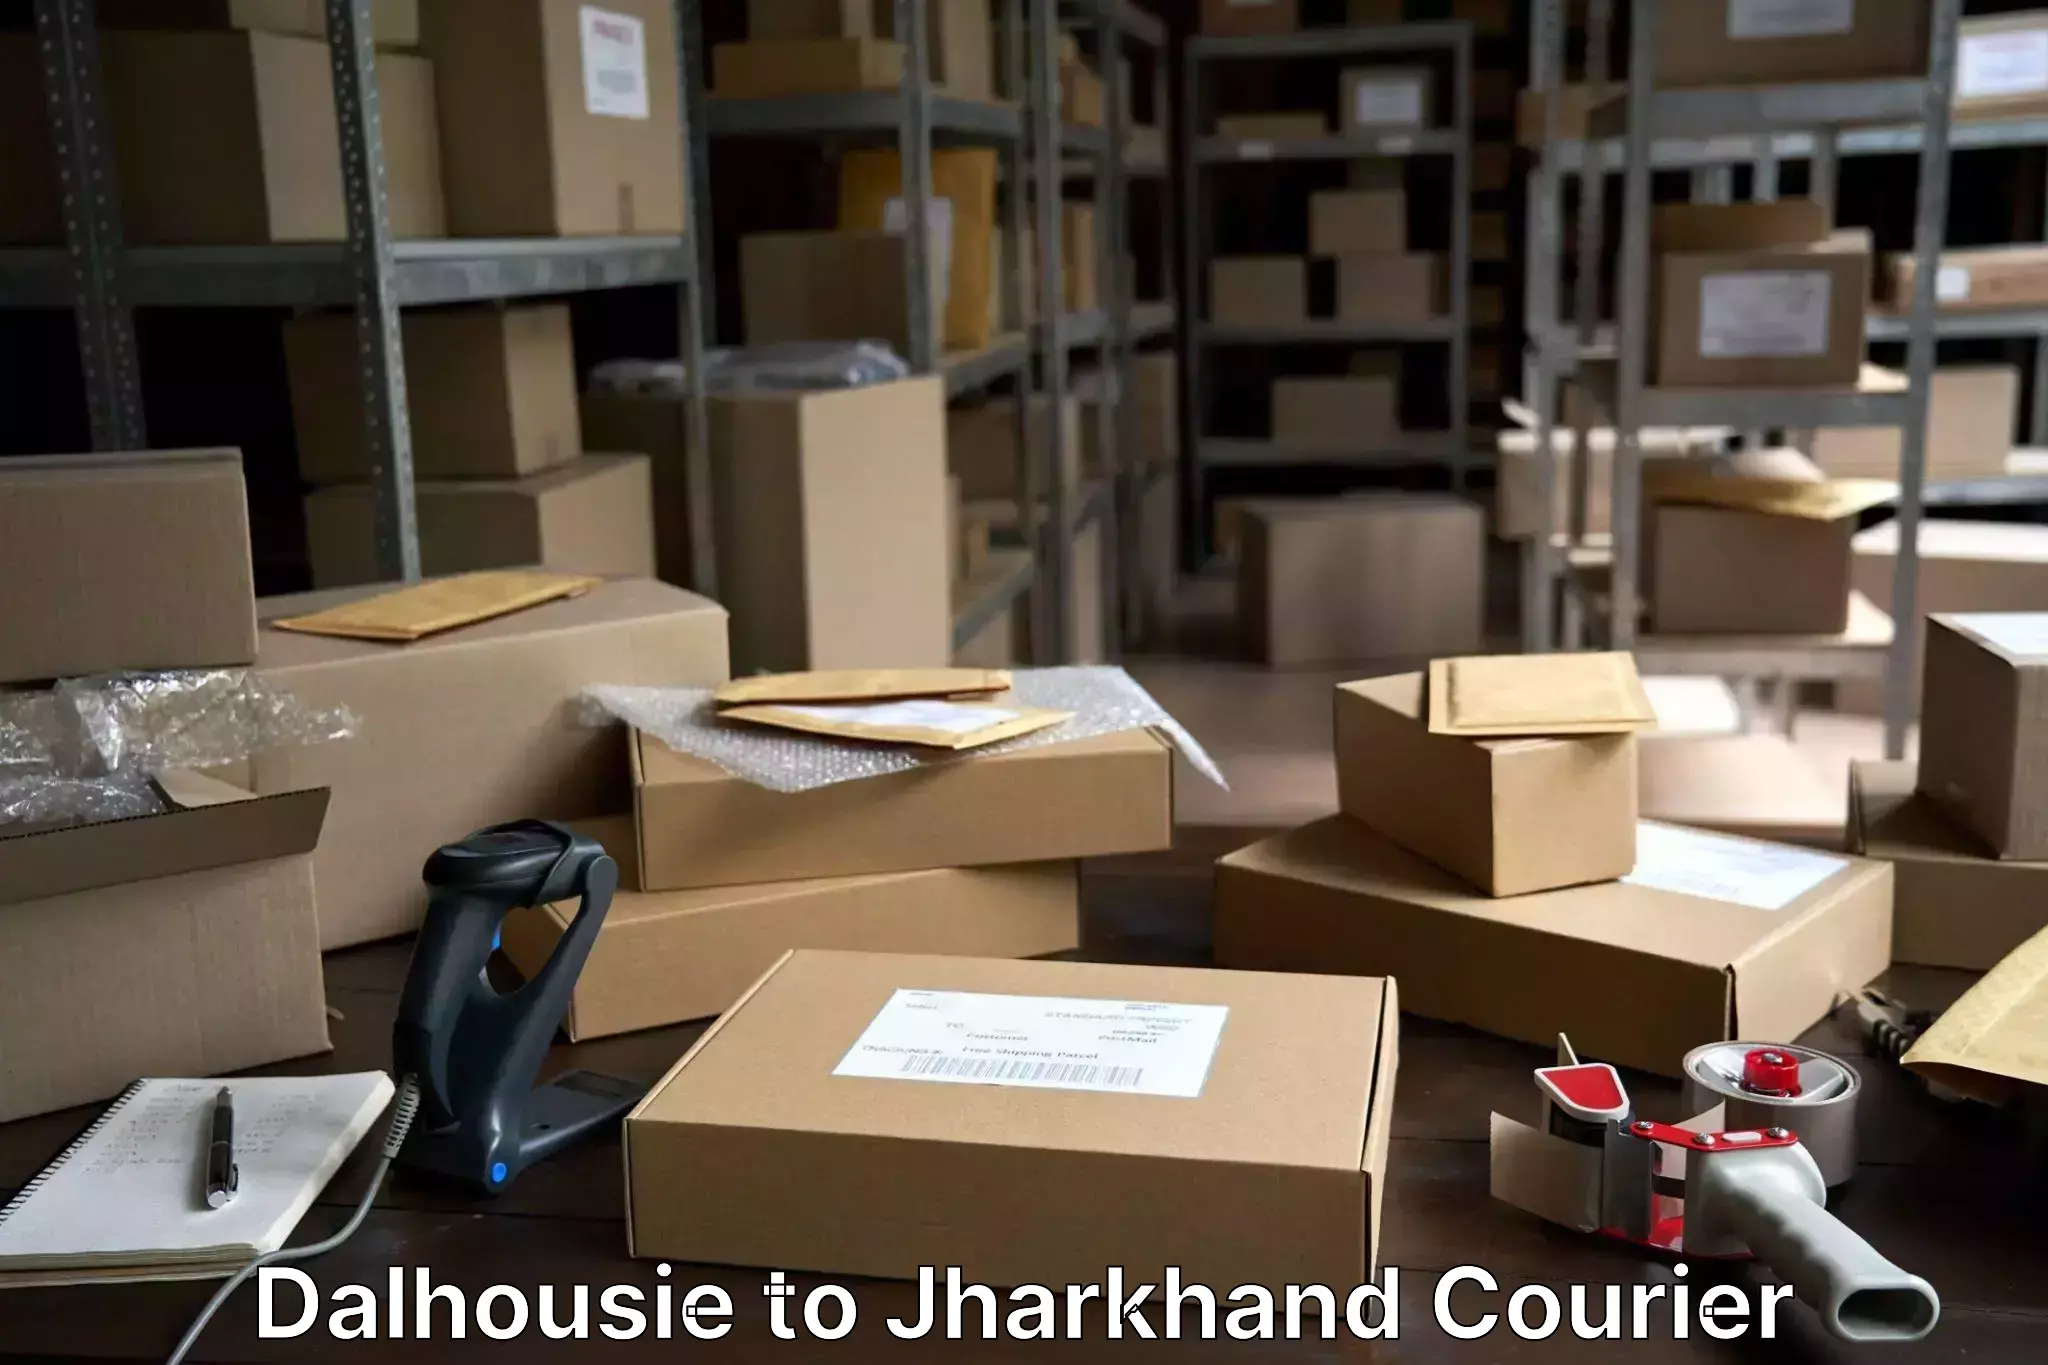 Luggage transport consultancy Dalhousie to Jharkhand